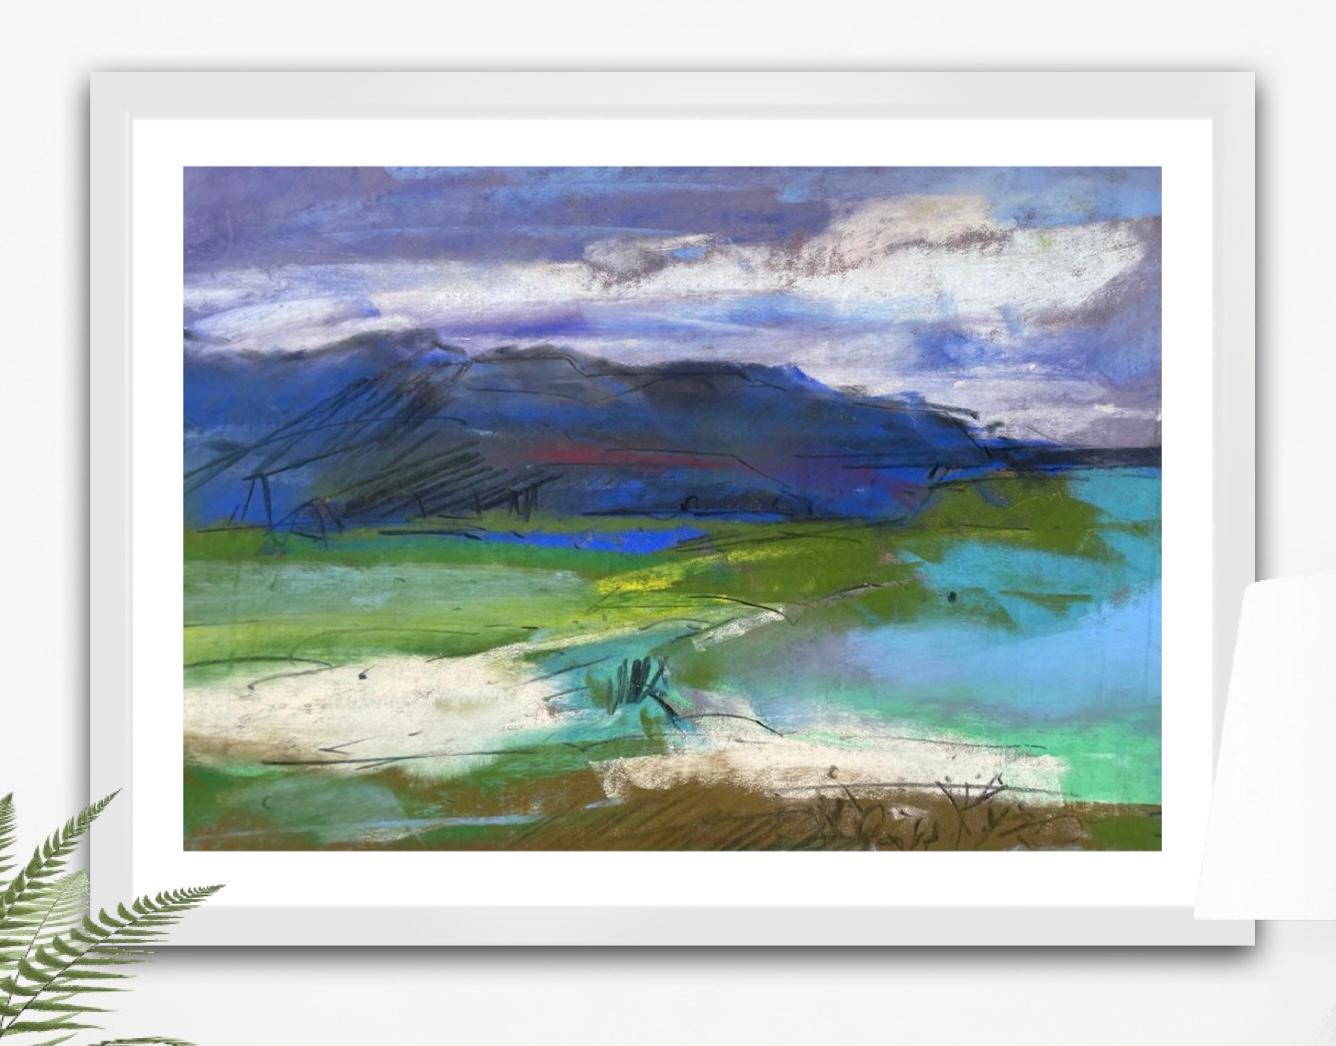 Loch Fyne, seascape, skyscape, Scotland, mountains, walking  - Abstract Expressionist Painting by Natalie Bird